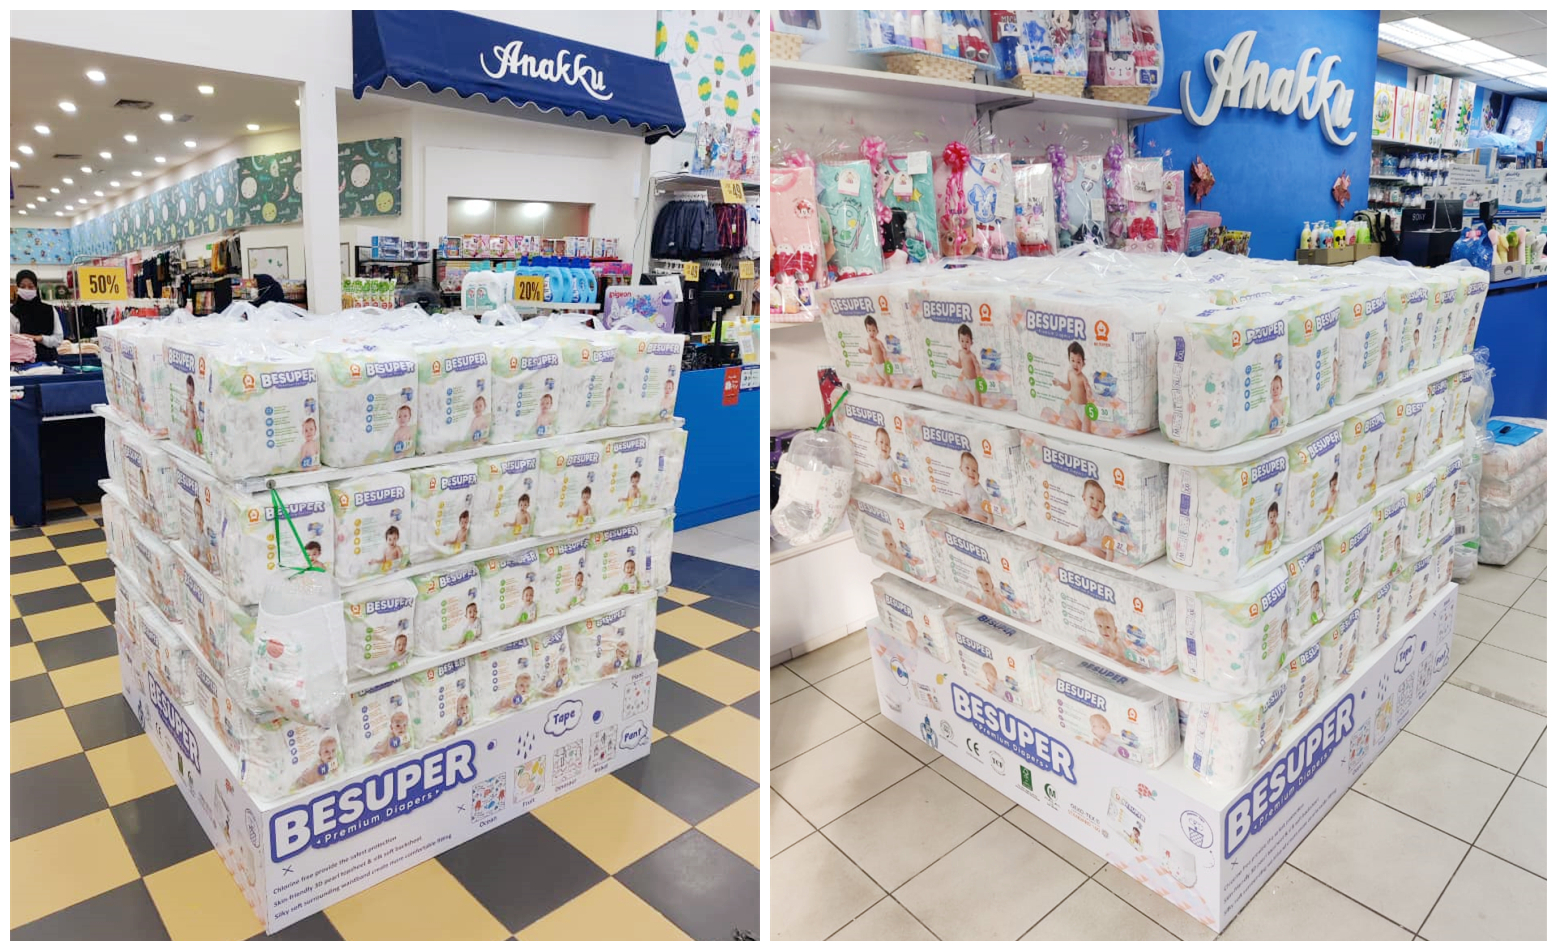 Besuper Launches at Anakku to Expand Malaysia Distribution